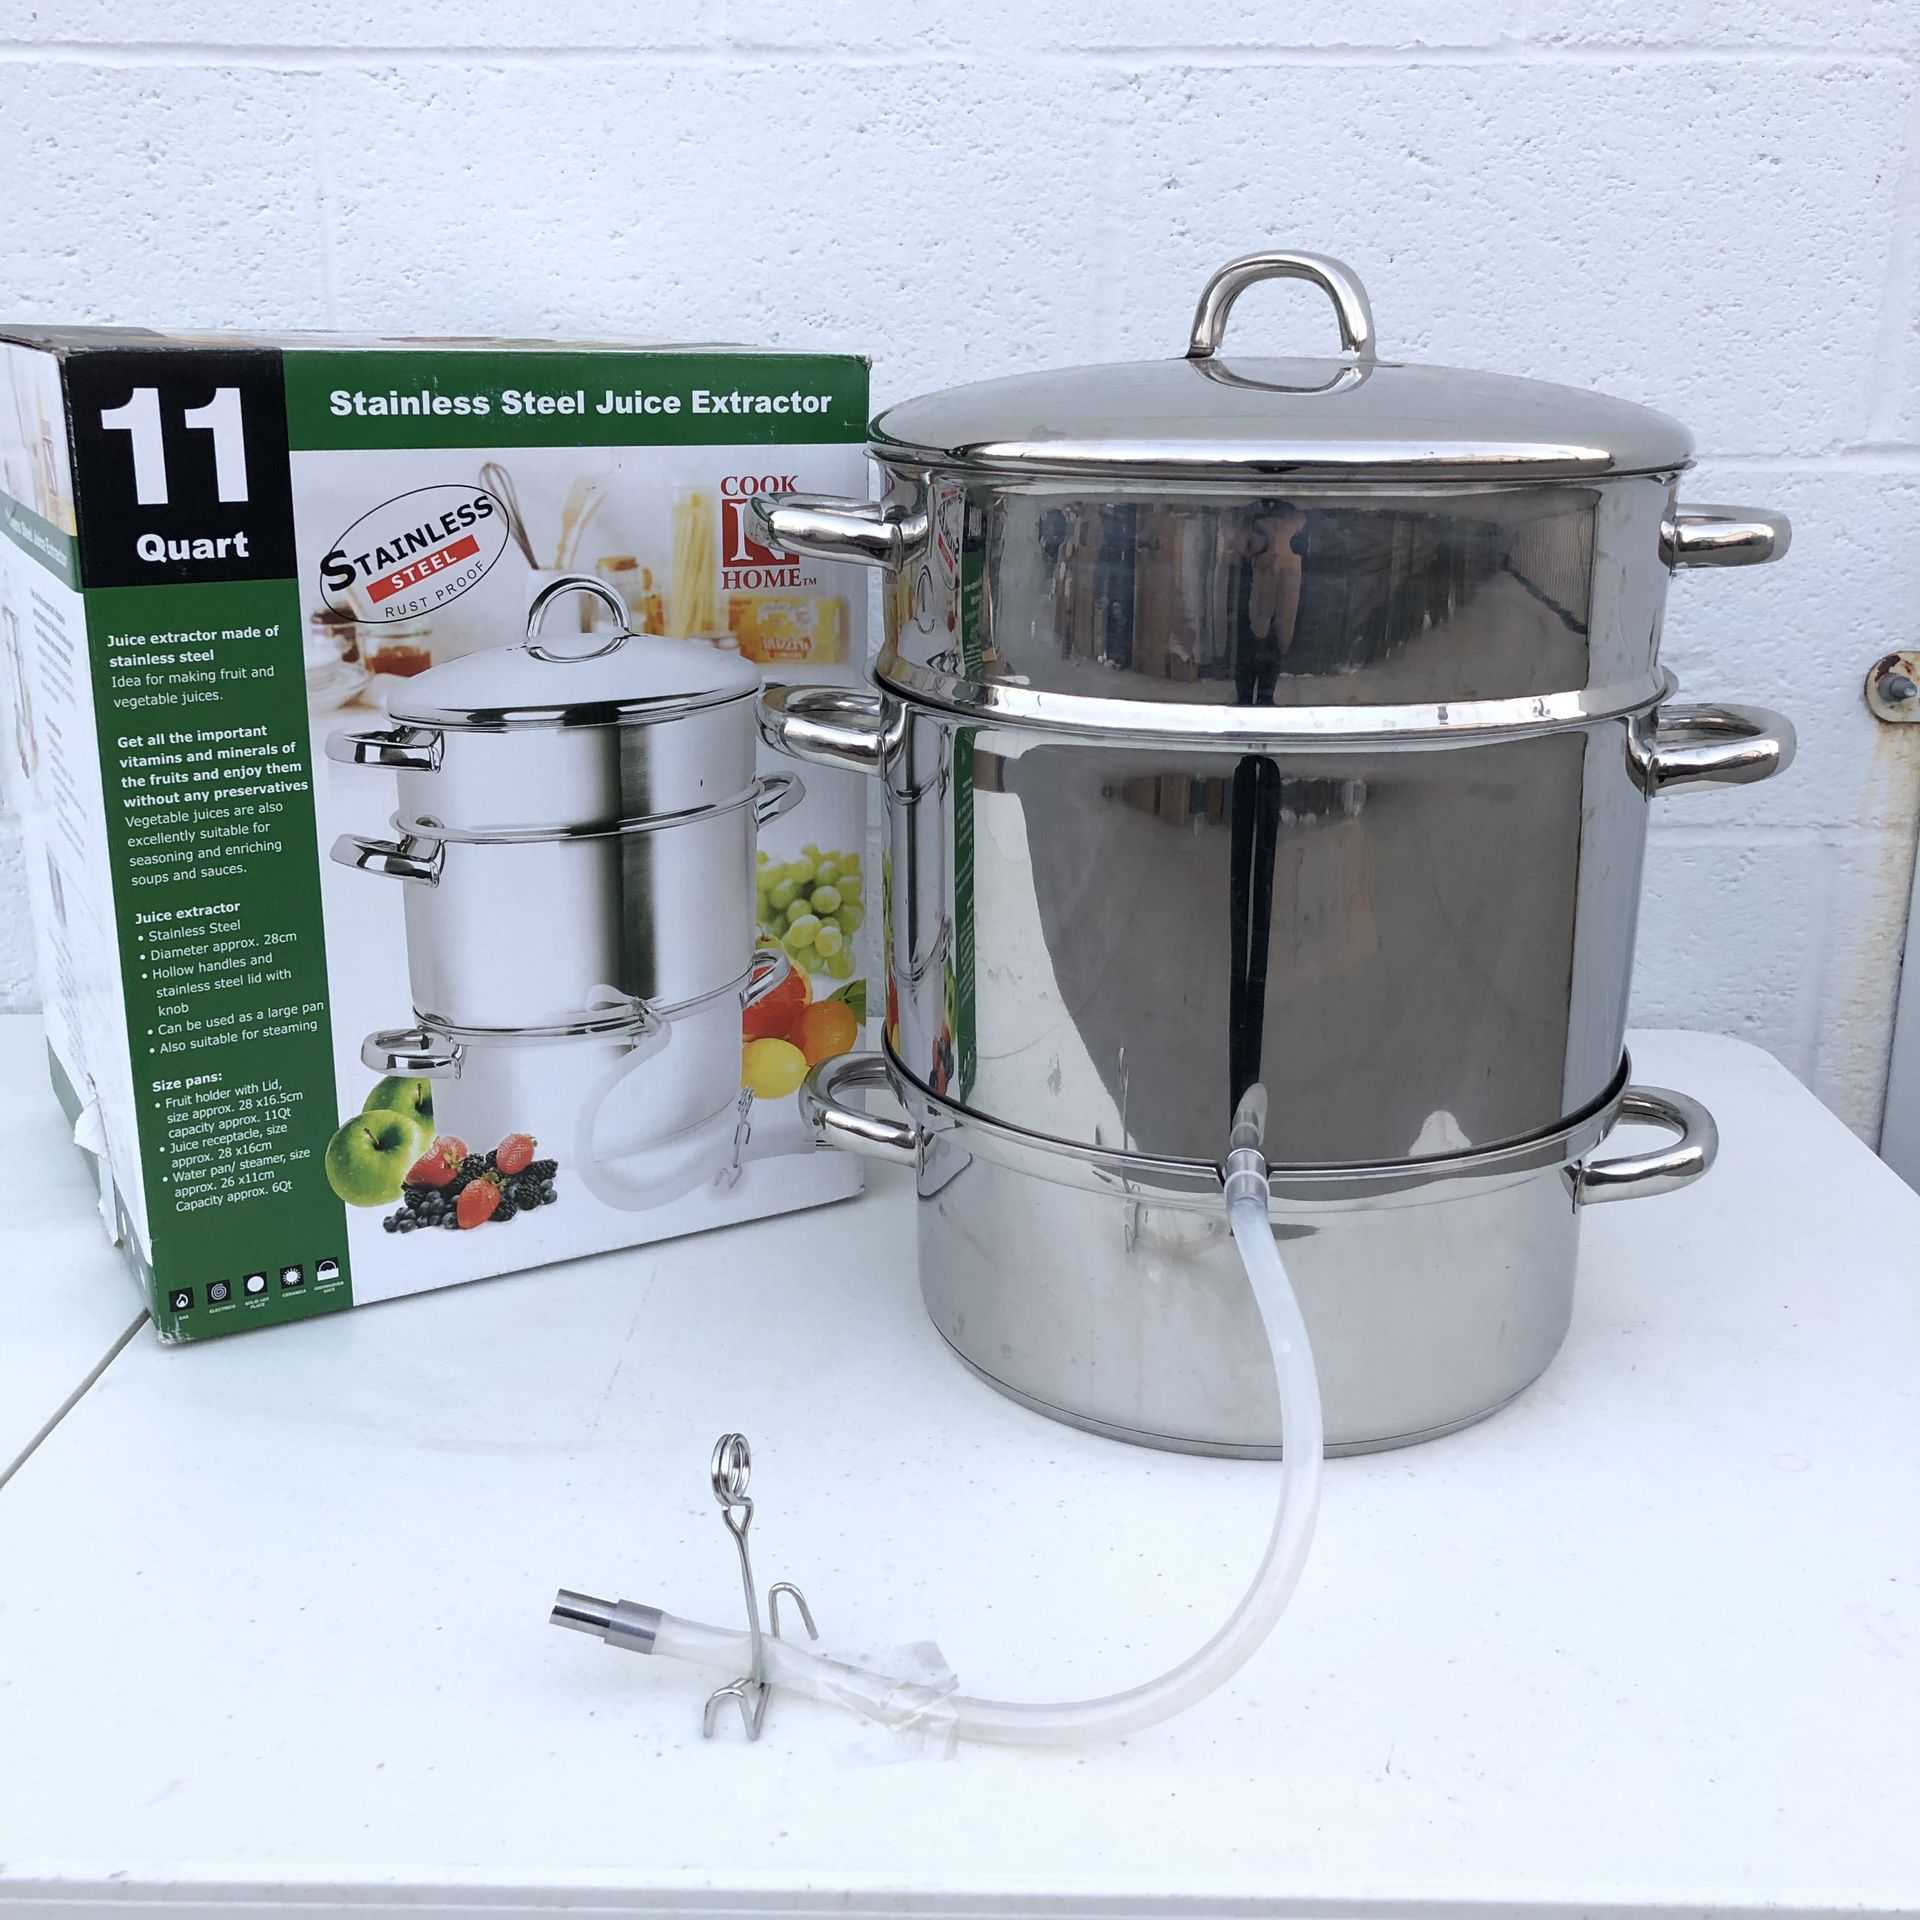 Cook N Home Stainless Steel Juice Extractor Steamer Vegetables and Fruits Kitchen Cookware Home Appliances $20